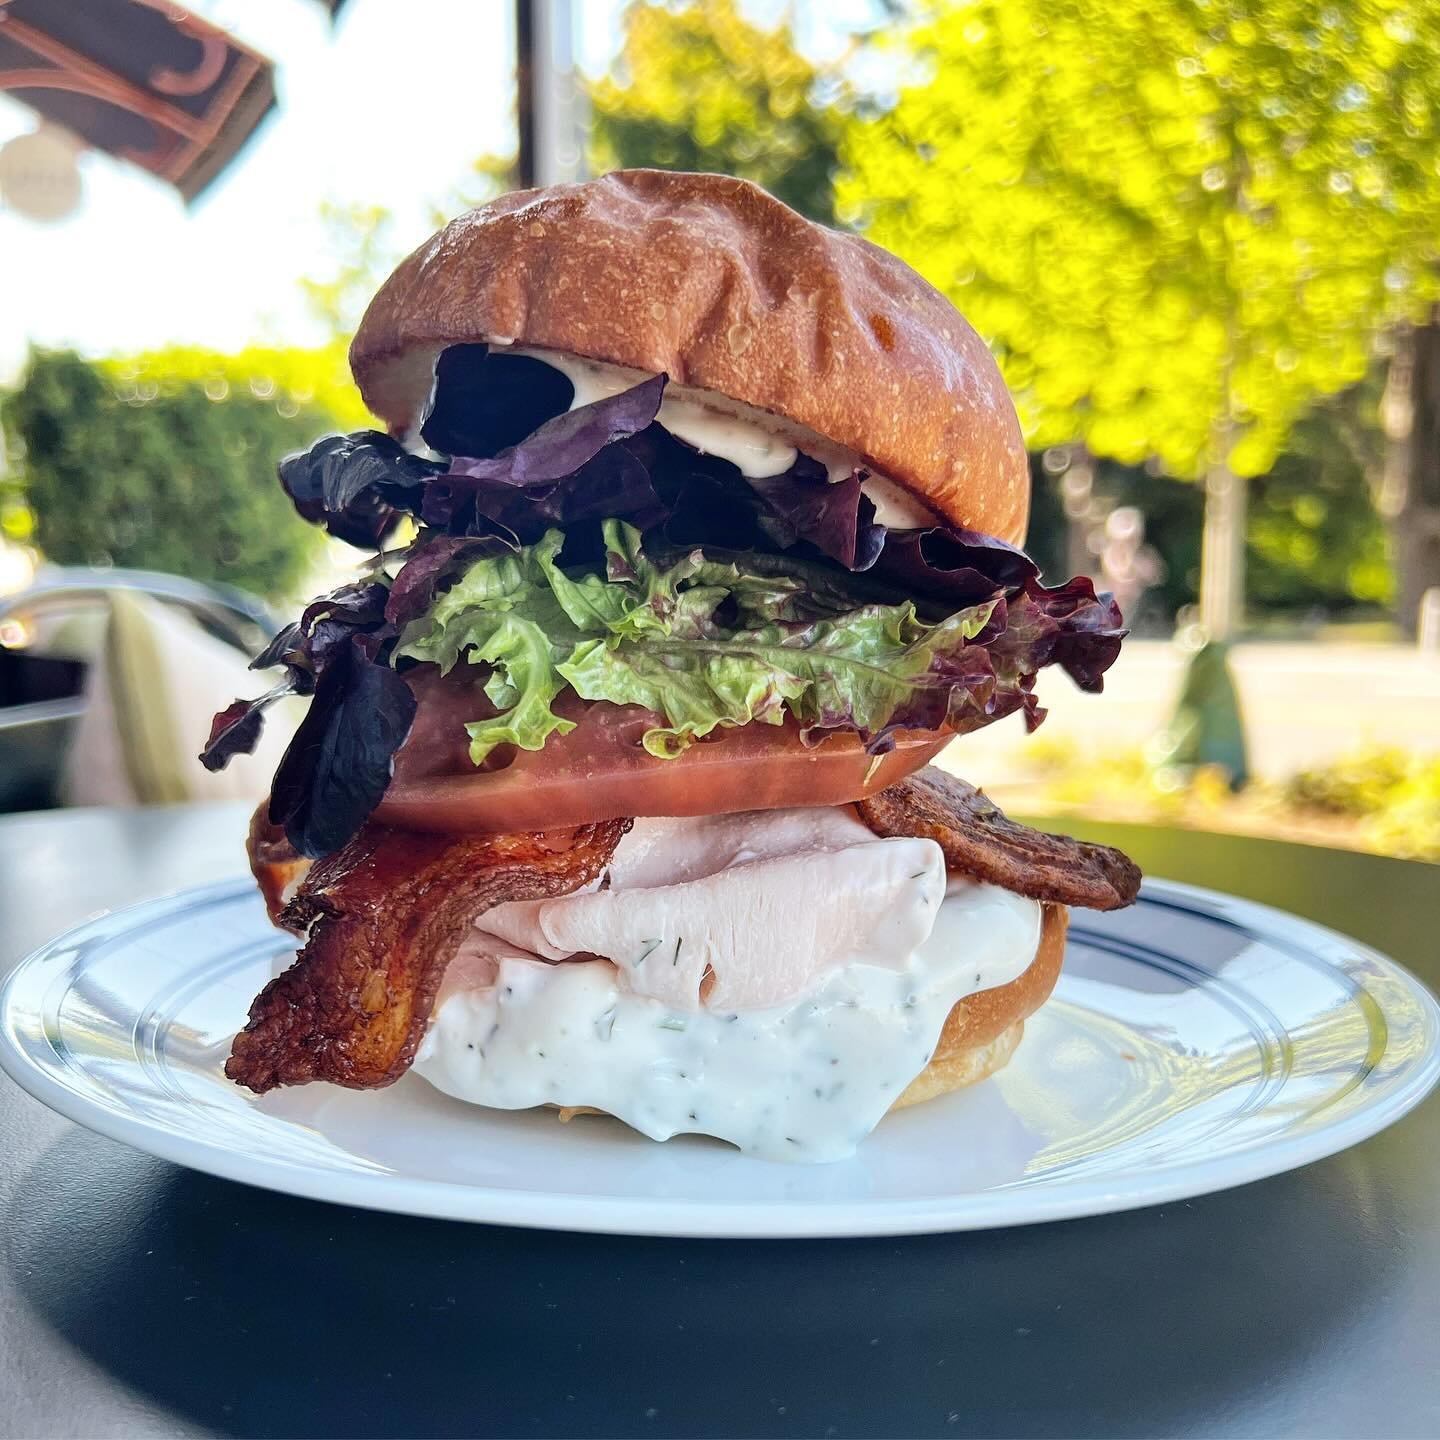 It&rsquo;s back!! TBR will be on the ⚡️Specials⚡️ board starting tomorrow (5/8)!! The tomatoes are OG juicy marinated tomatoes - heirlooms aren&rsquo;t quite ripe for the picking. Tomato, tomahto, right?! 
//
Smoked turkey, bacon, ranch, marinated to